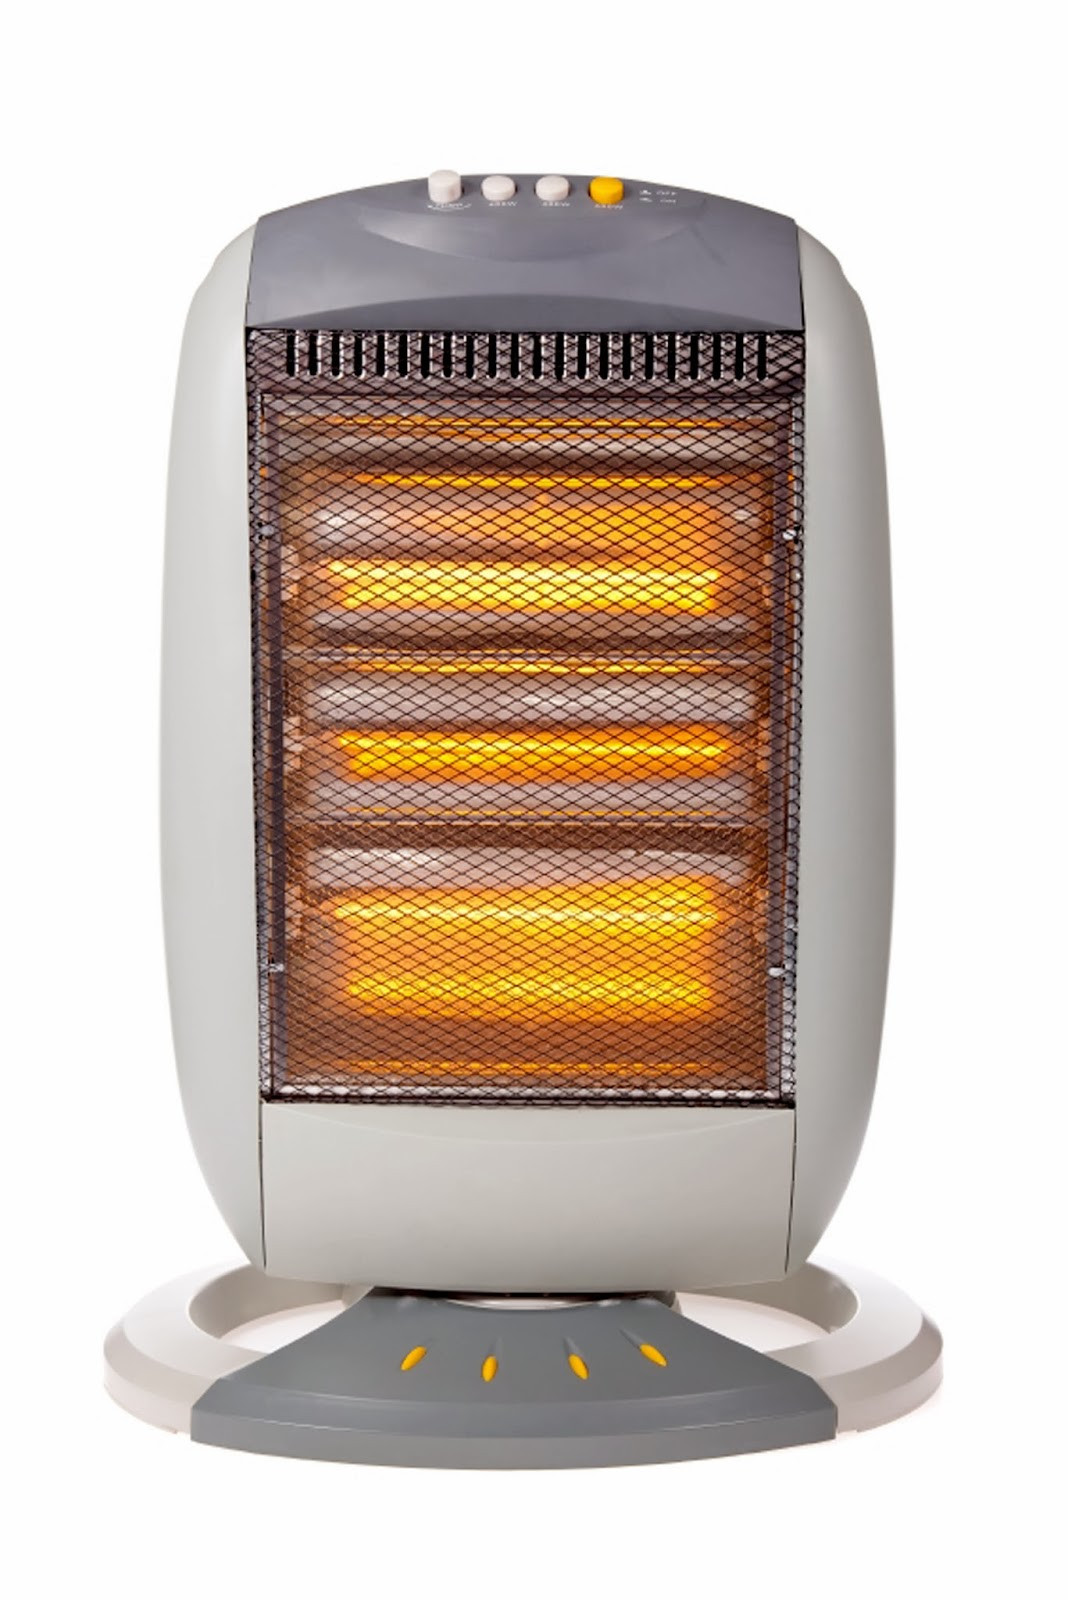 Safest Heater For Kids Room
 Space Heater Safety Tips